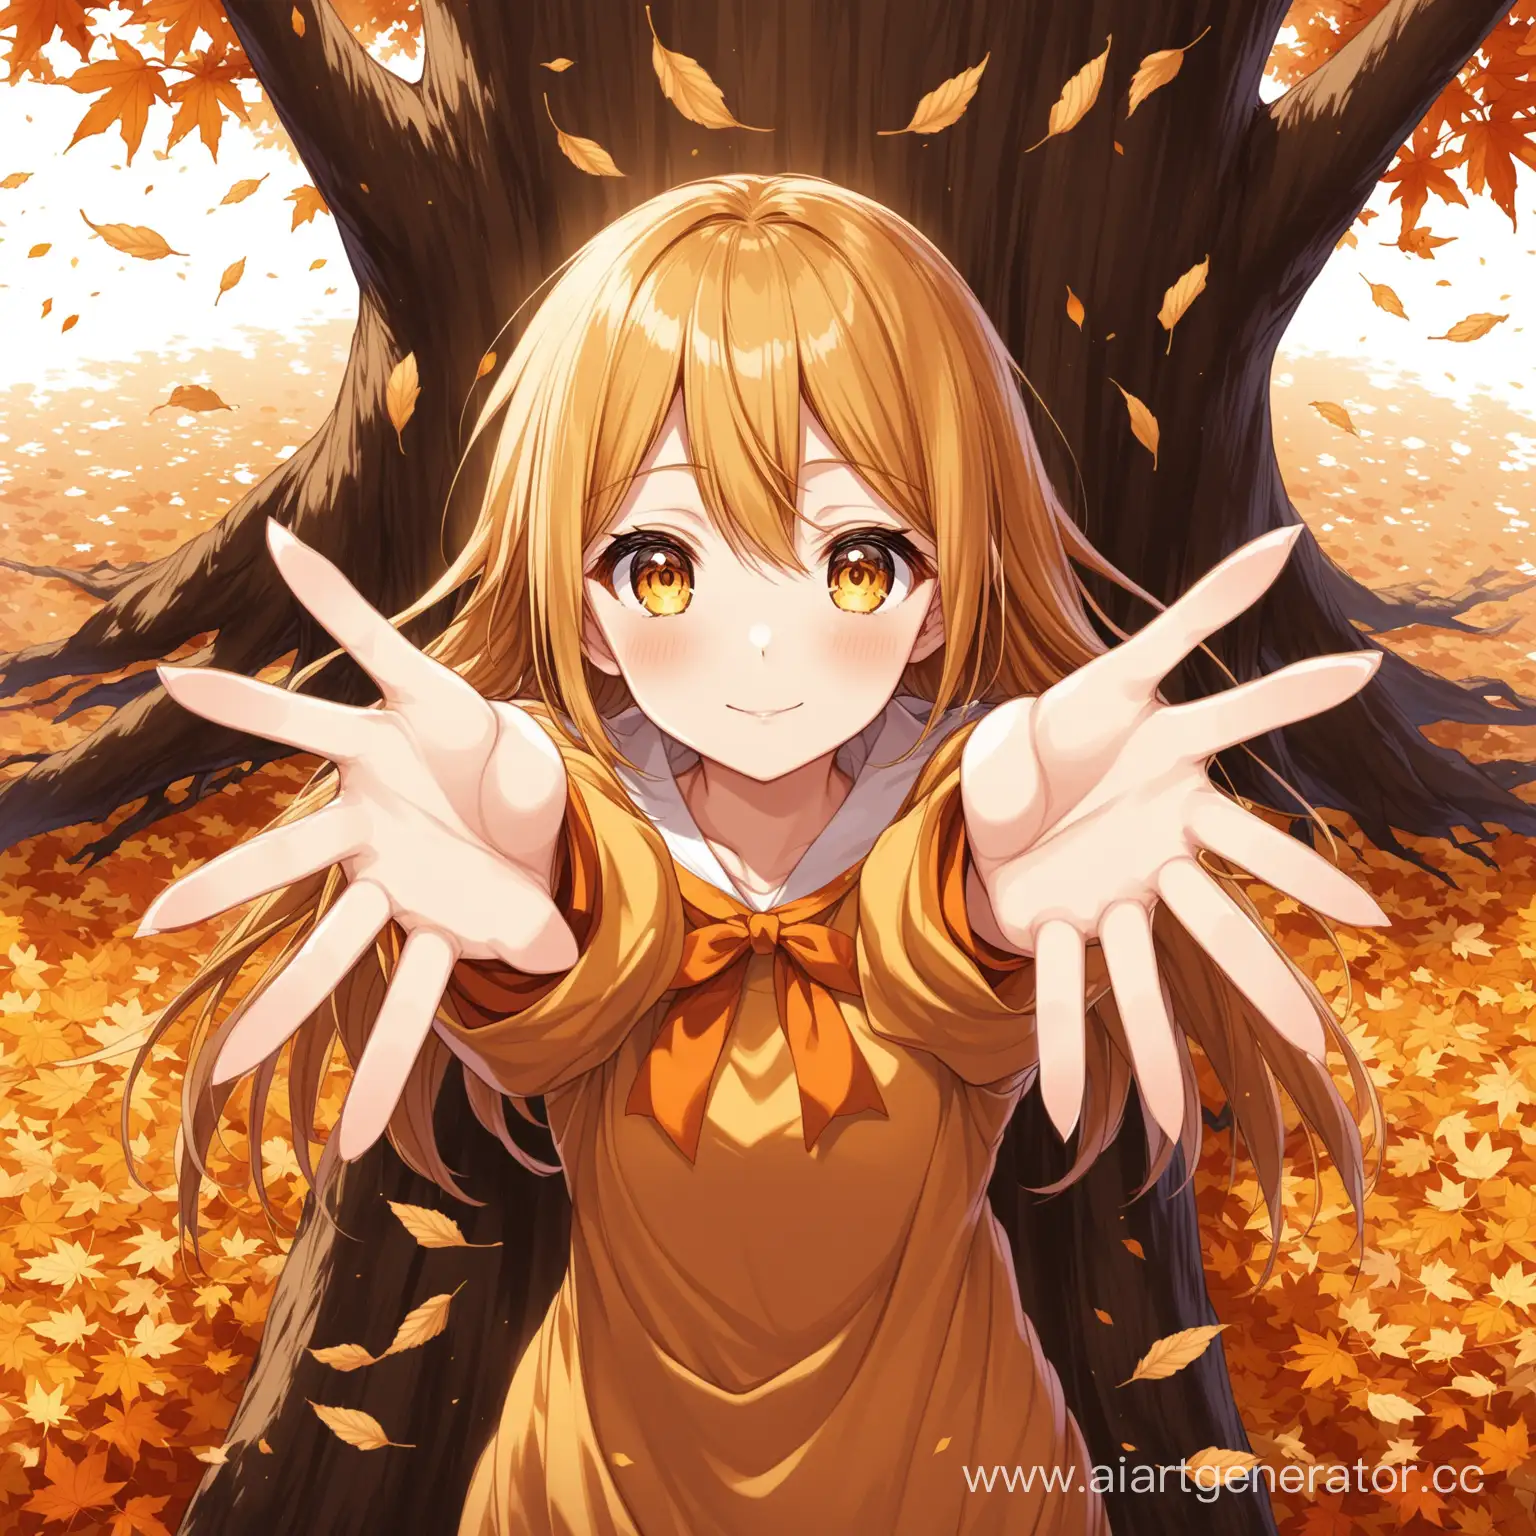 Anime-Girl-Tree-Reaching-Out-with-Falling-Leaves